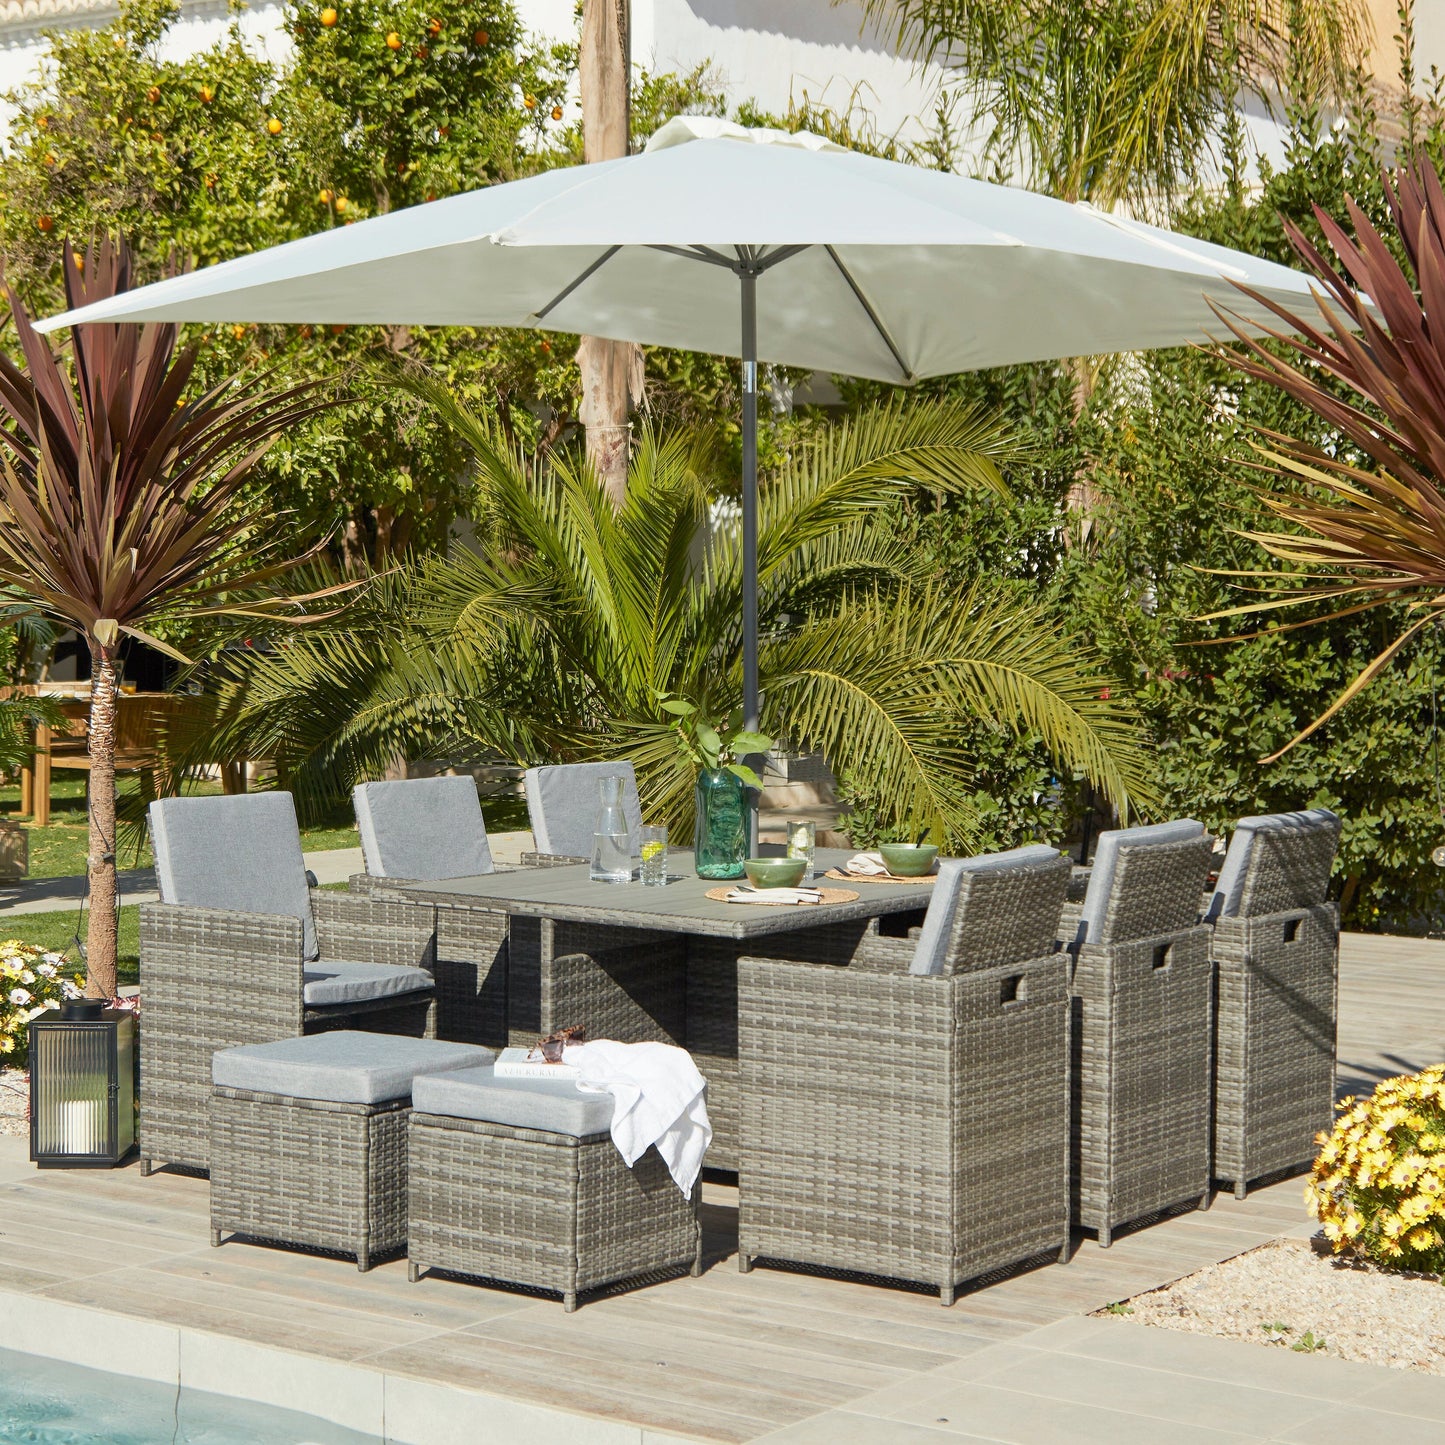 10 Seater Rattan Cube Outdoor Dining Set with Cream Parasol - Grey Weave Polywood Top